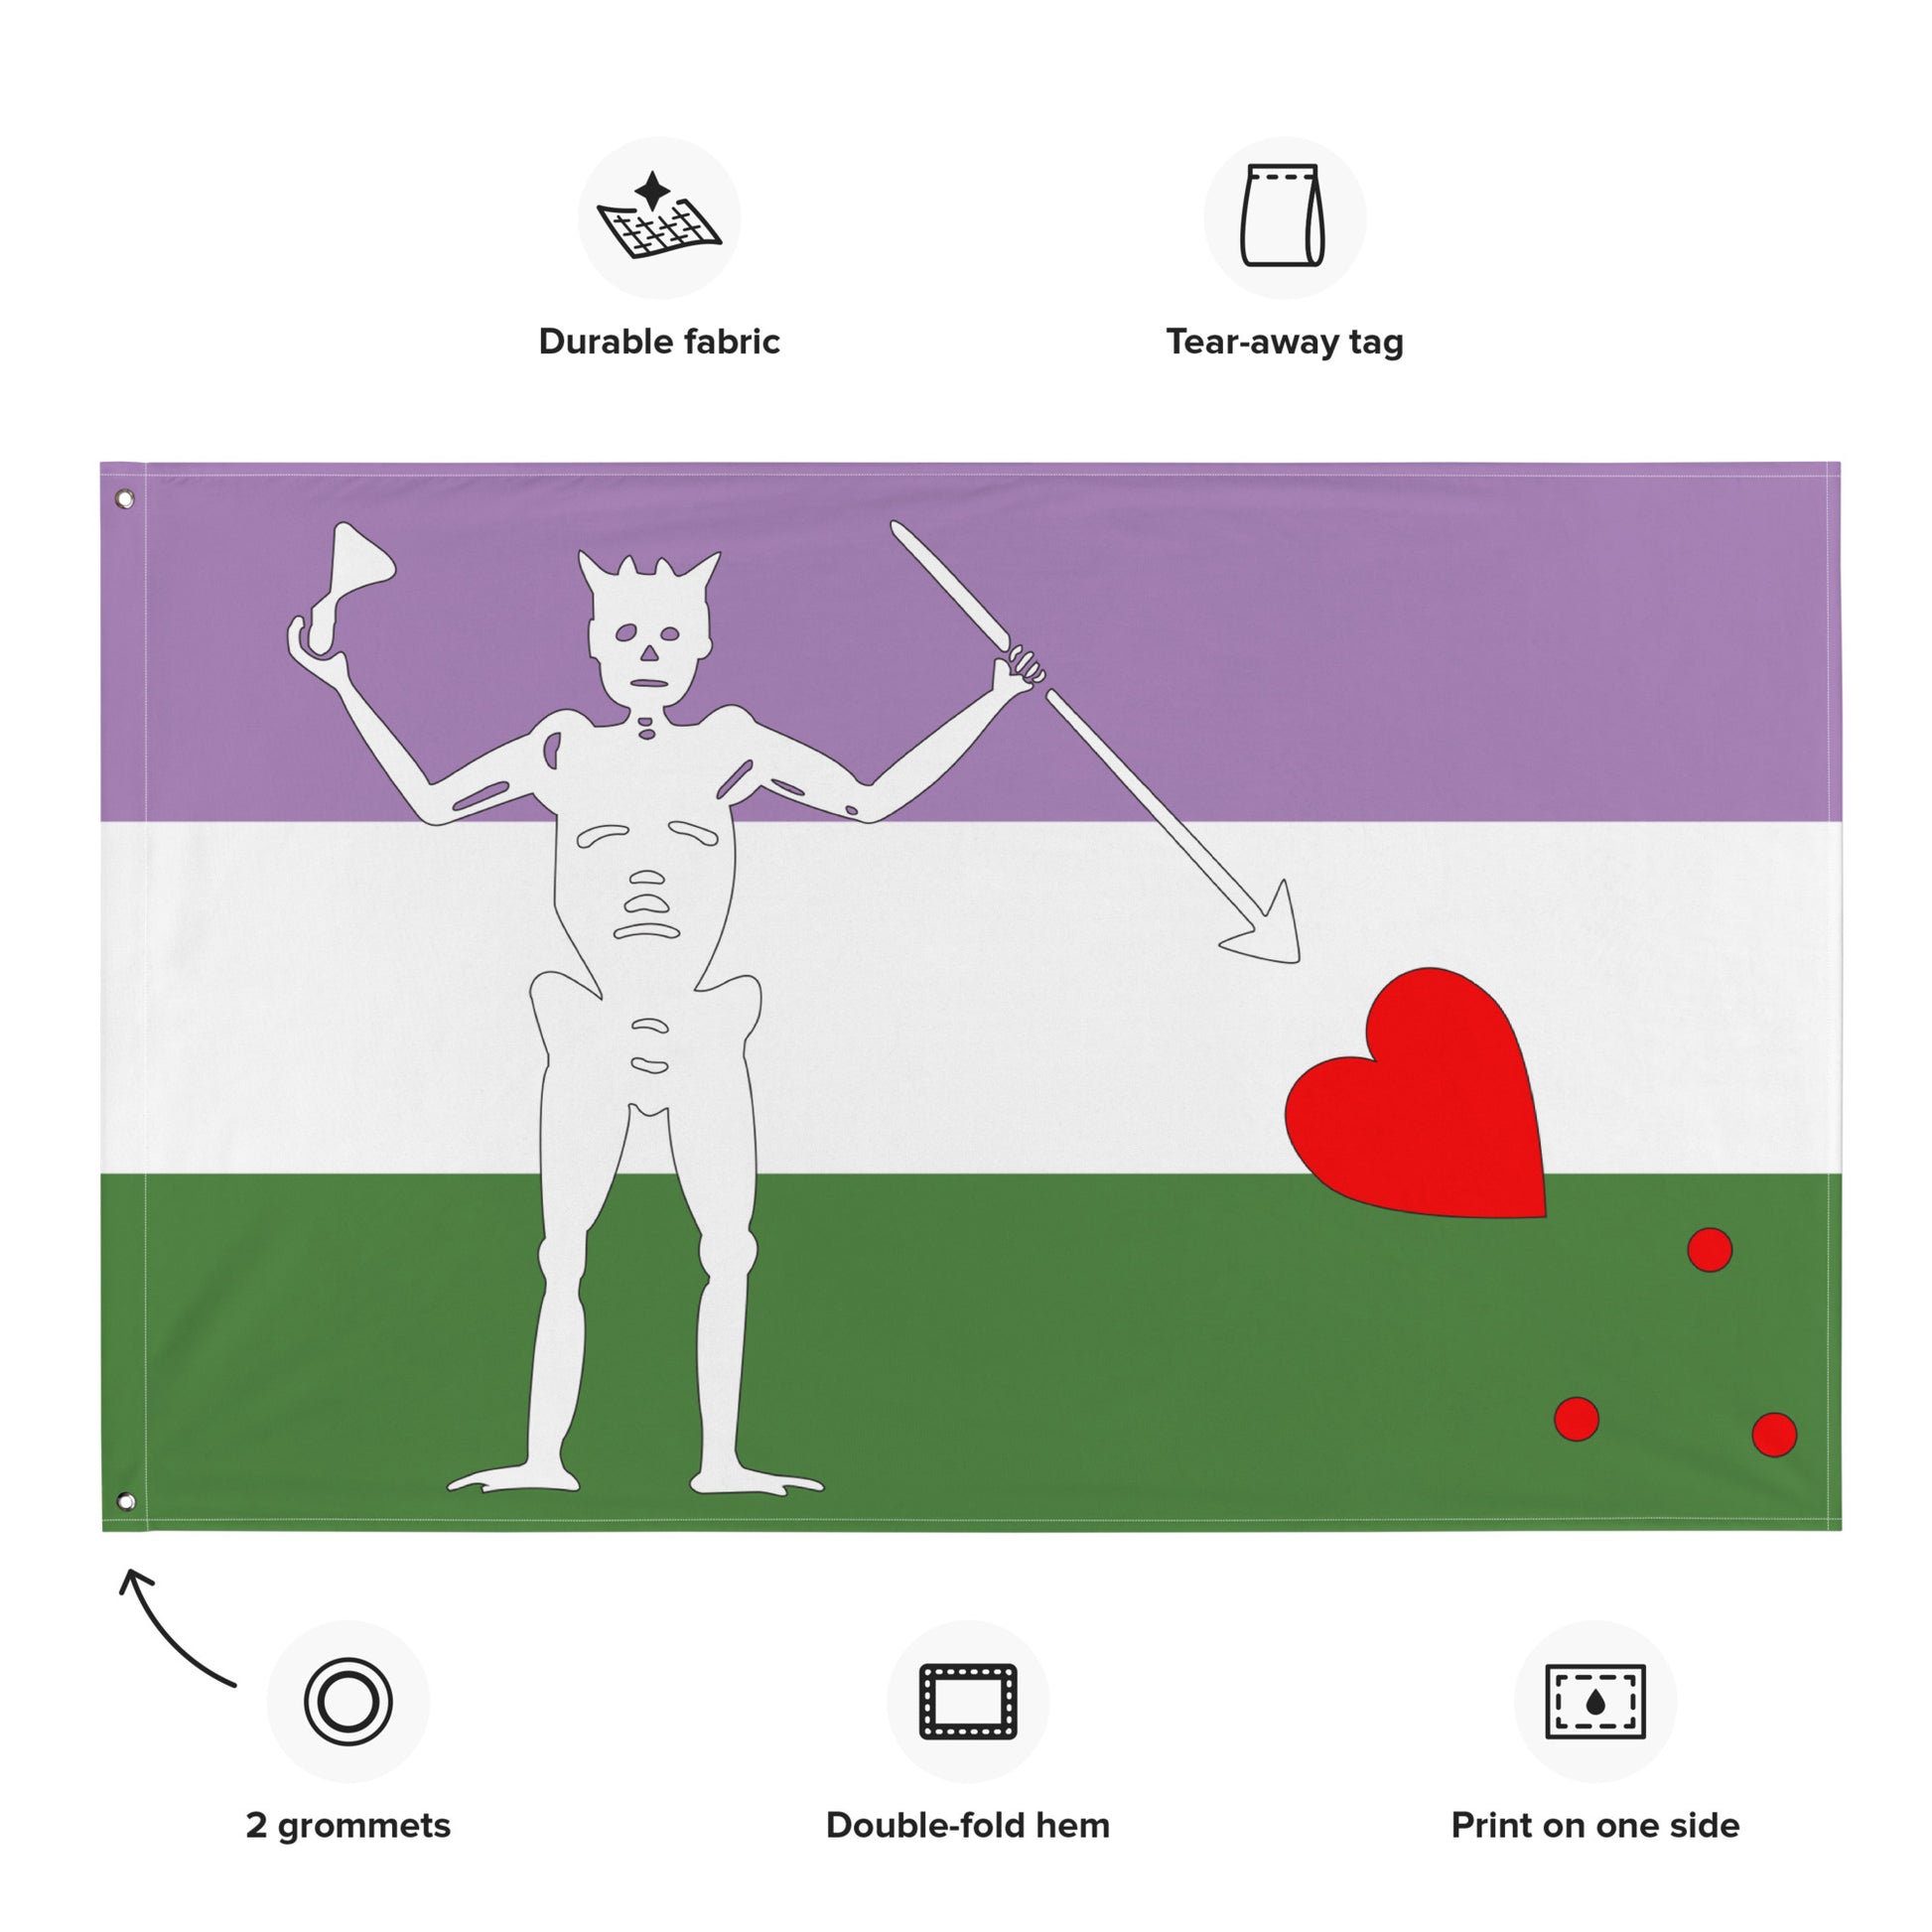 the genderqueer flag with blackbeard's symbol surrounded by the specifications of "durable fabric, tear-away tag, 2 grommets, double-fold hem, print on one side"